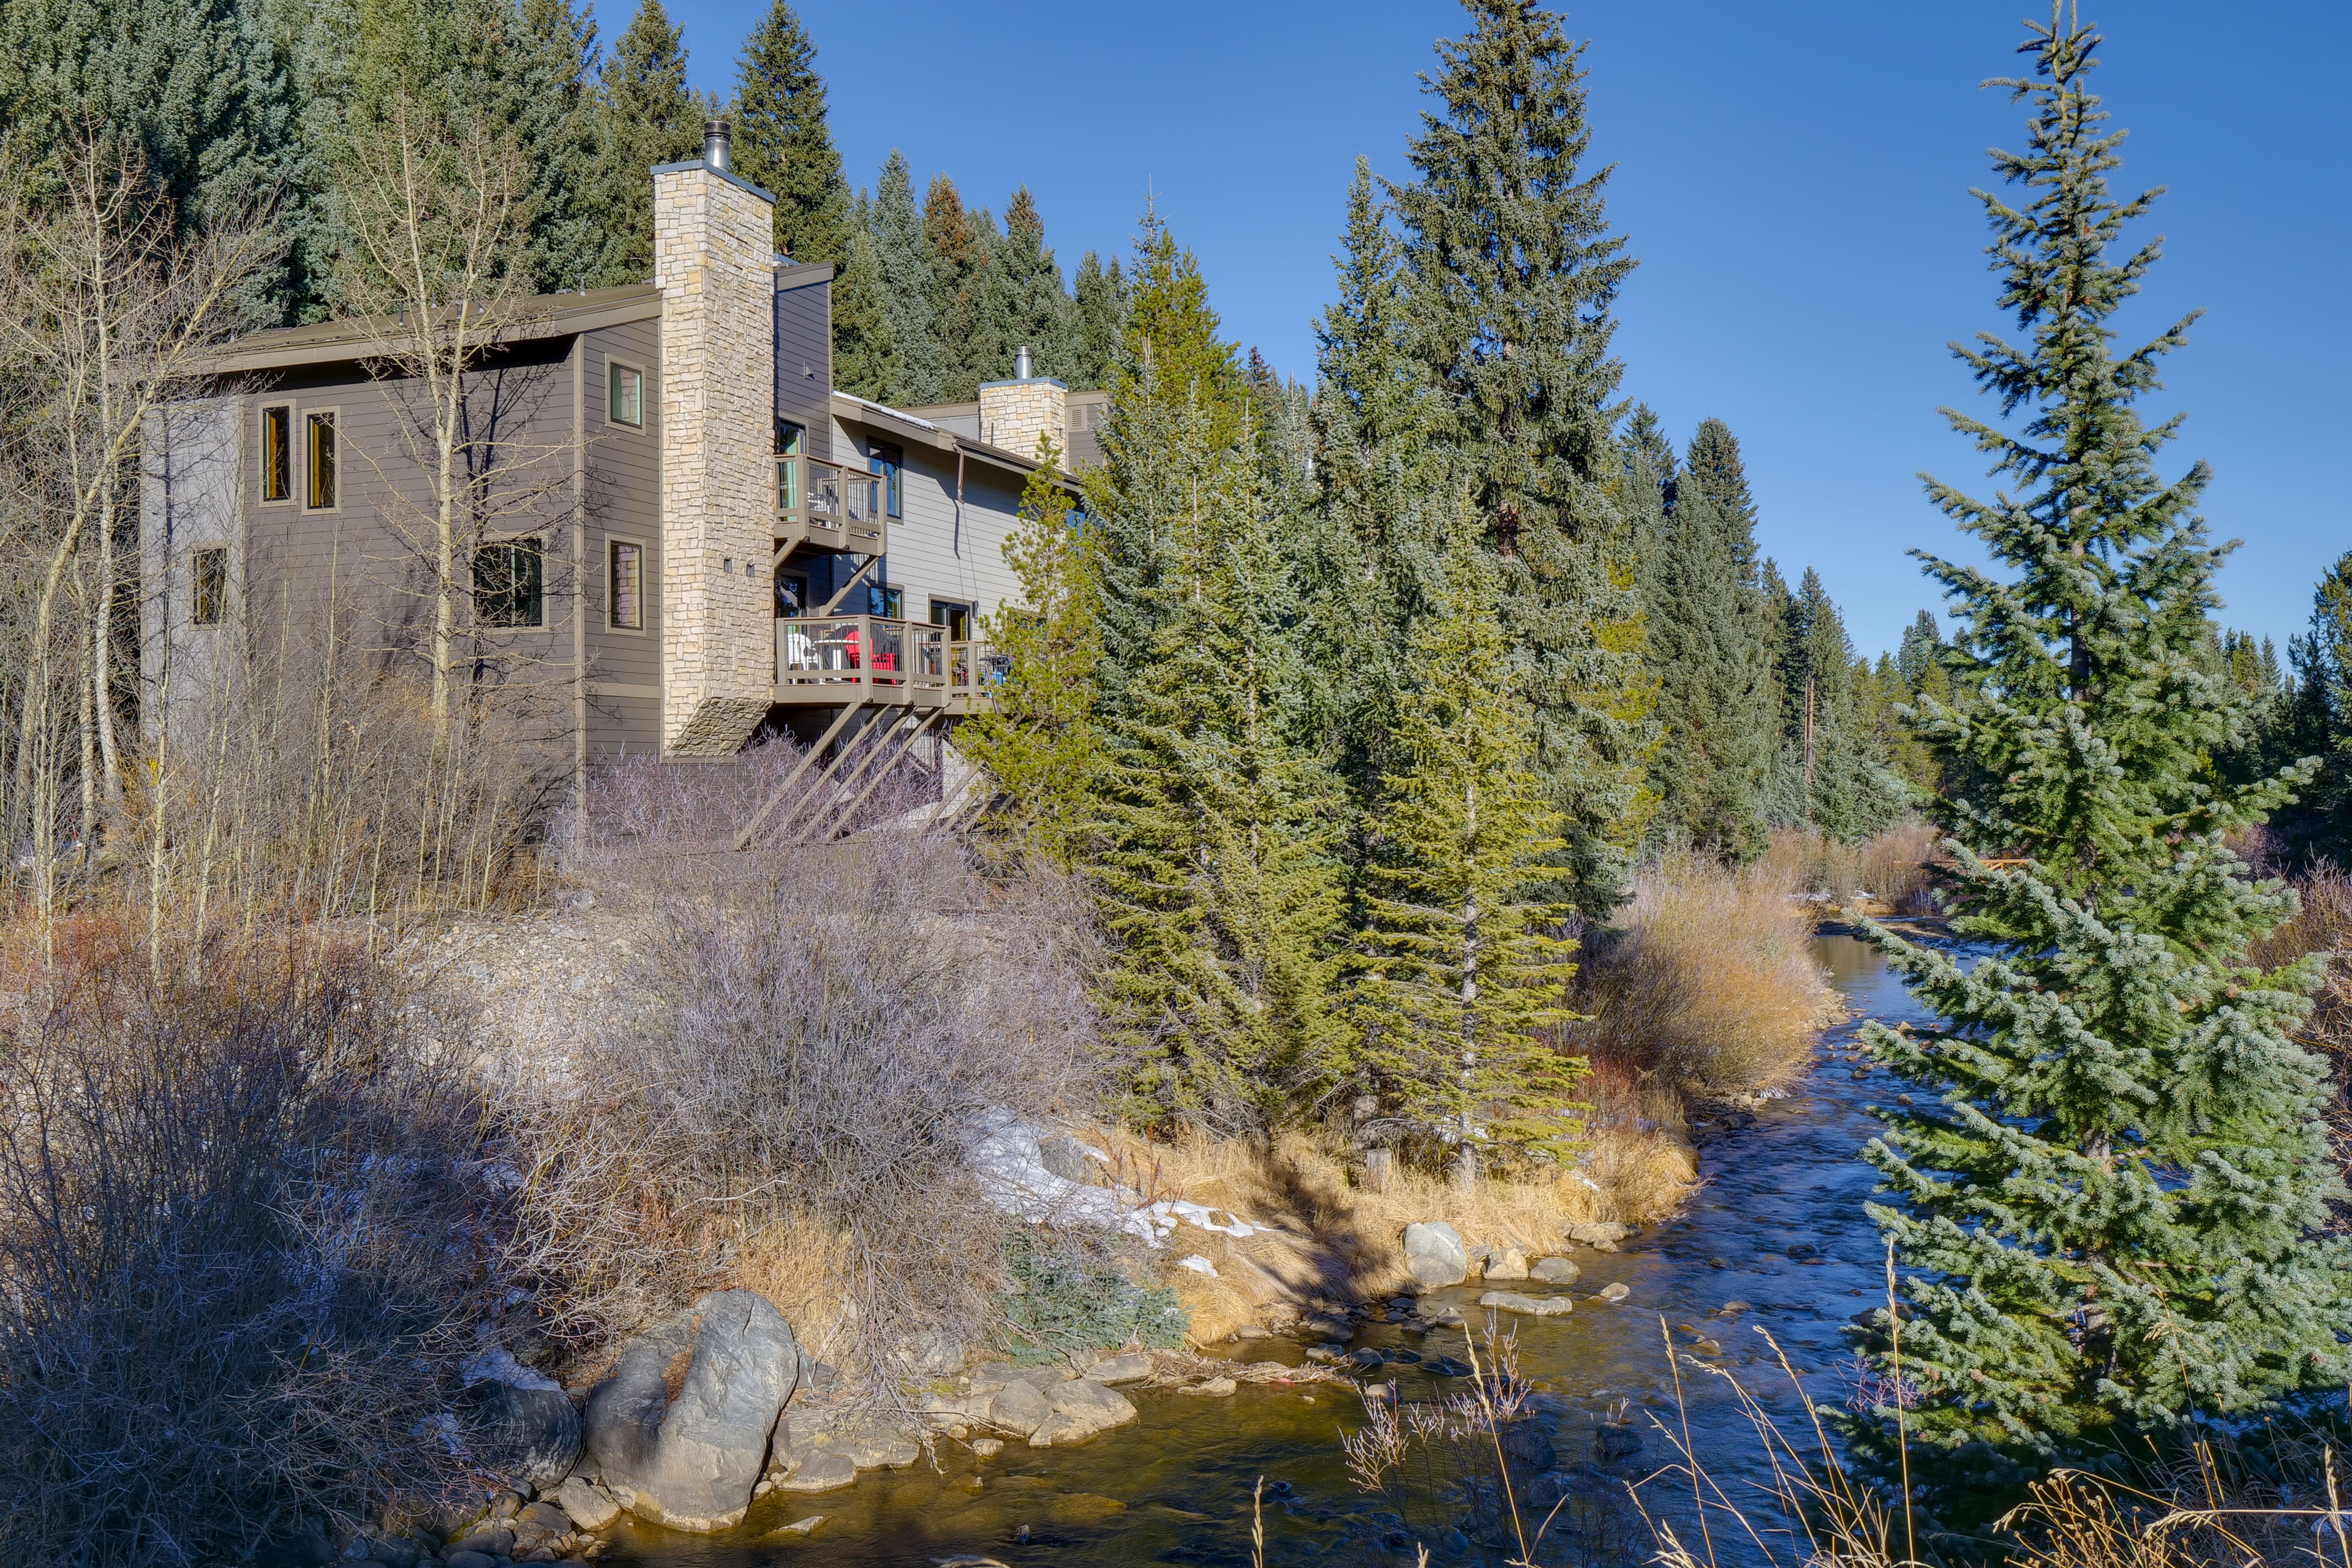 Breckenridge Vacation Rental | 2BR | 3BA | 1,270 Sq Ft | Stairs Required